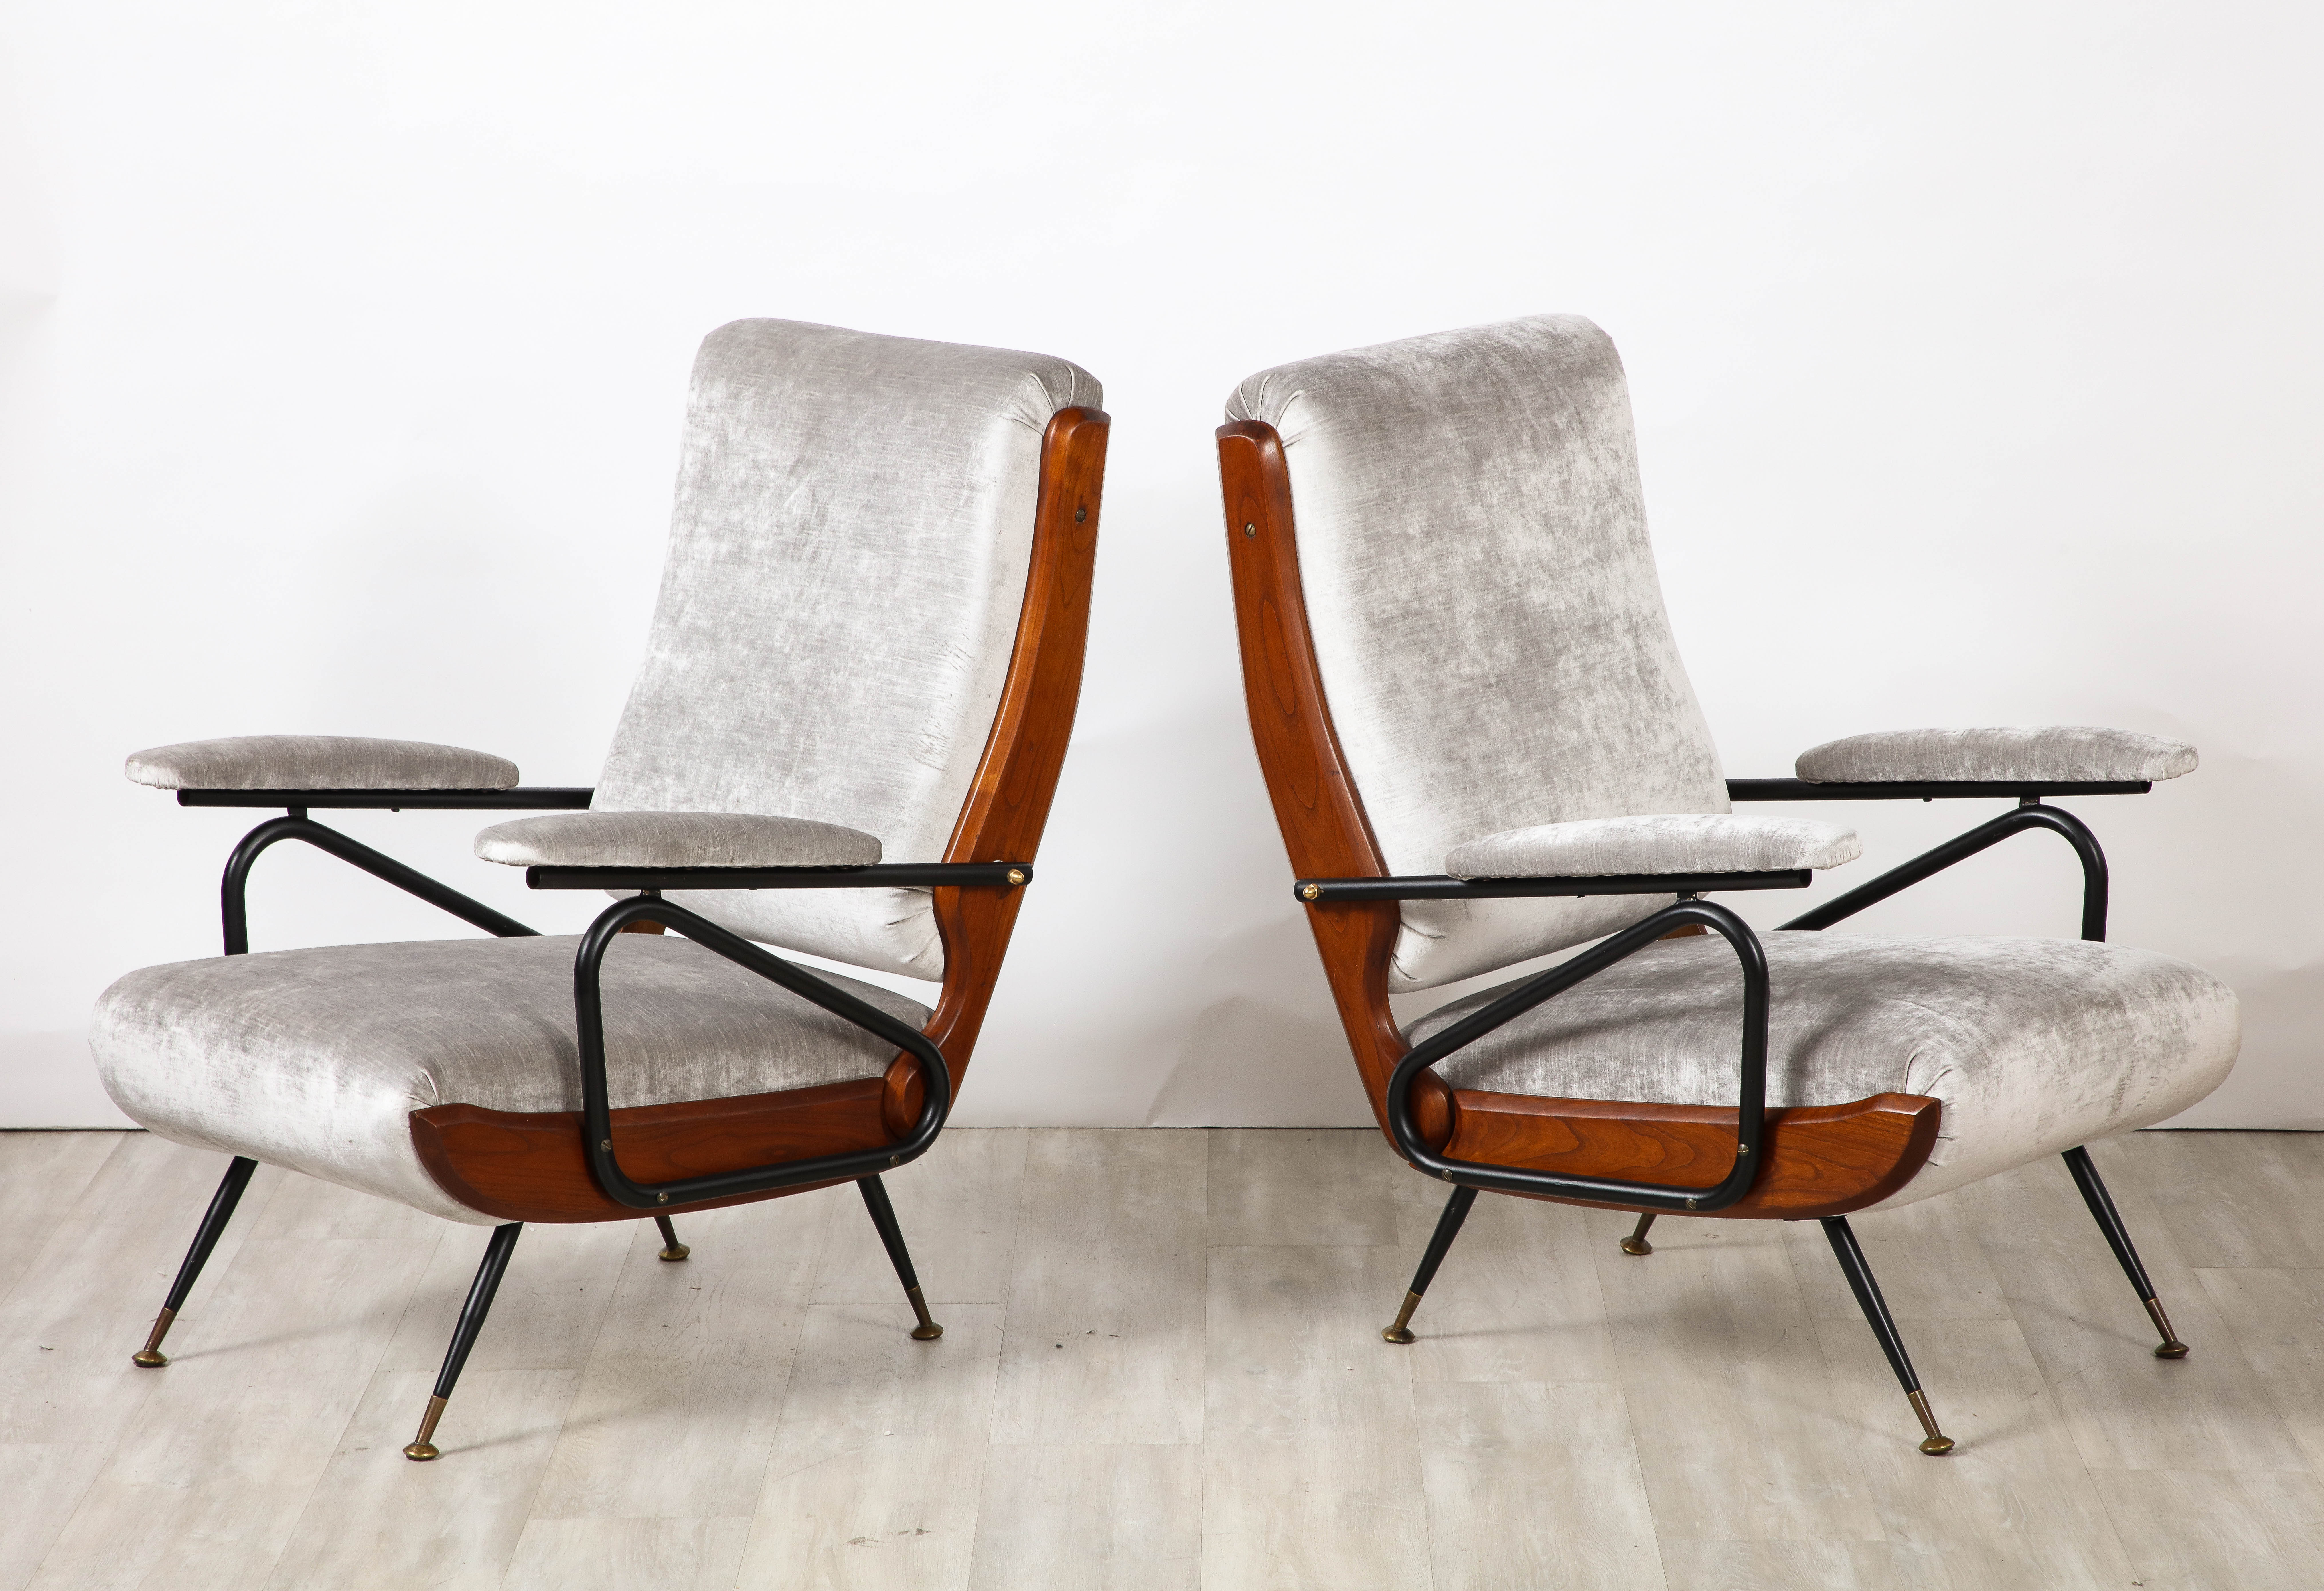 A pair of Italian modernist reclining lounge chairs / arm chairs, the geometric metal frames accentuate the molded walnut surround on the sides of the back and seats, the legs tapered metal ending in brass sabot.  Newly upholster in a neutral grey